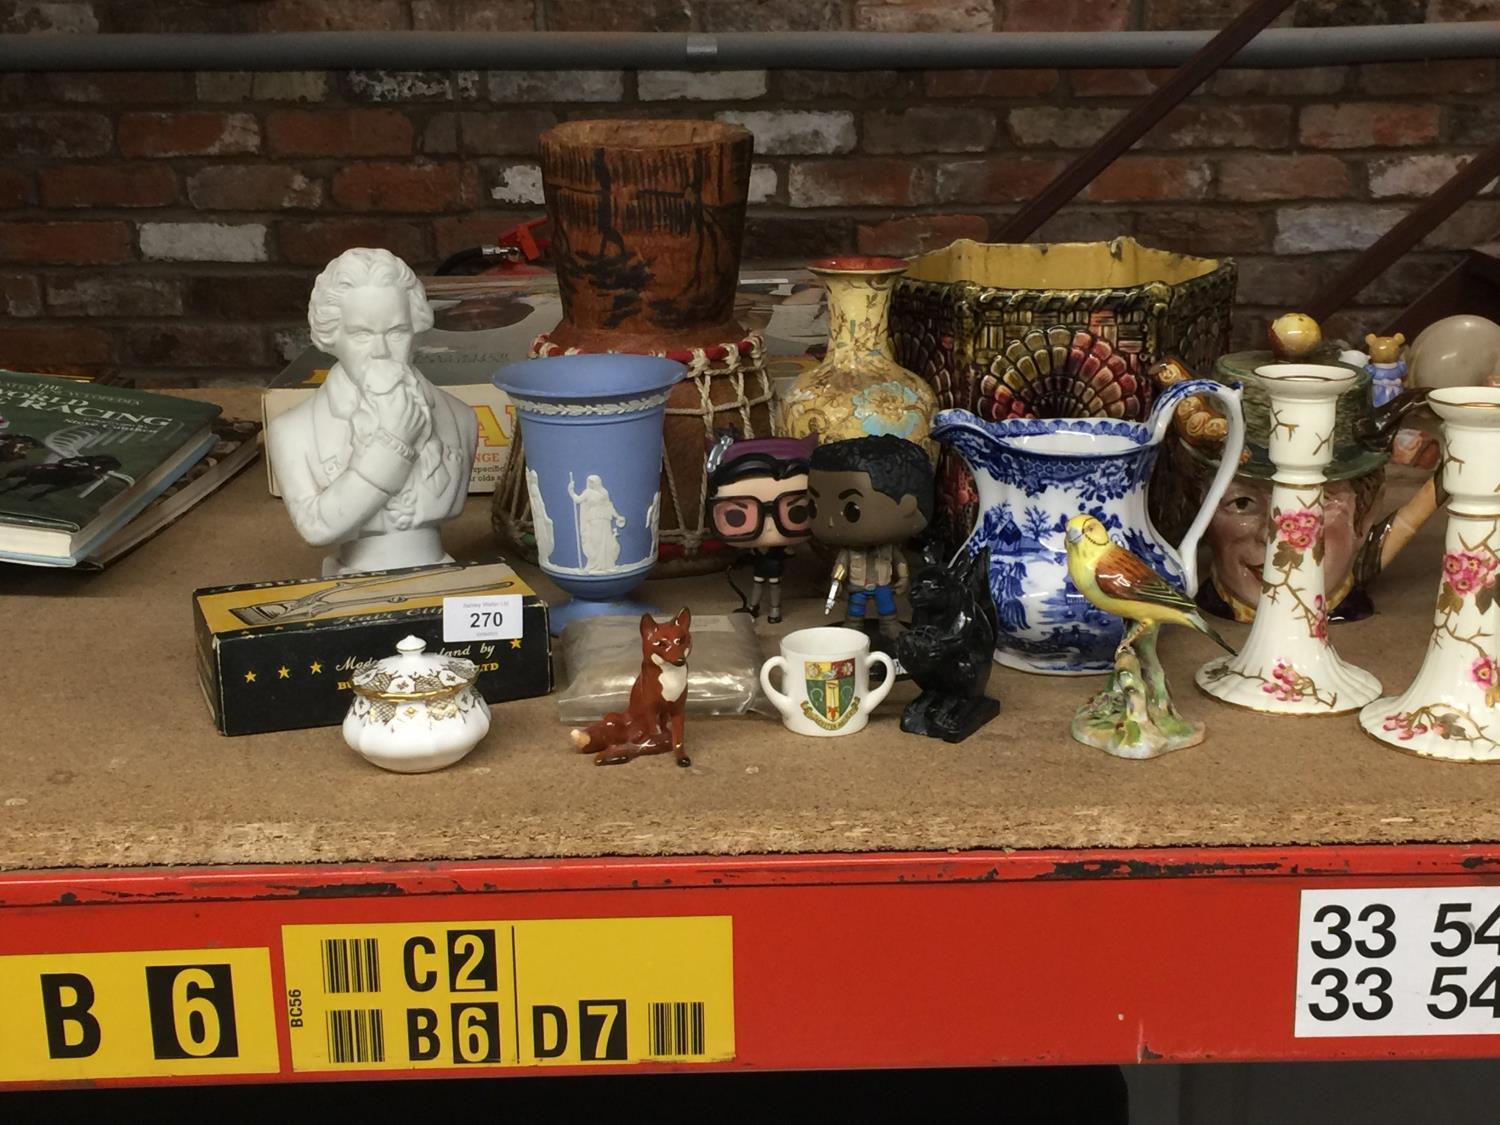 A QUANTITY OF ITEMS TO INCLUDE CERAMIC CANDLESTICKS, MAJOLICA STYLE PLANTER, FIGURES, VASES, JUGS,